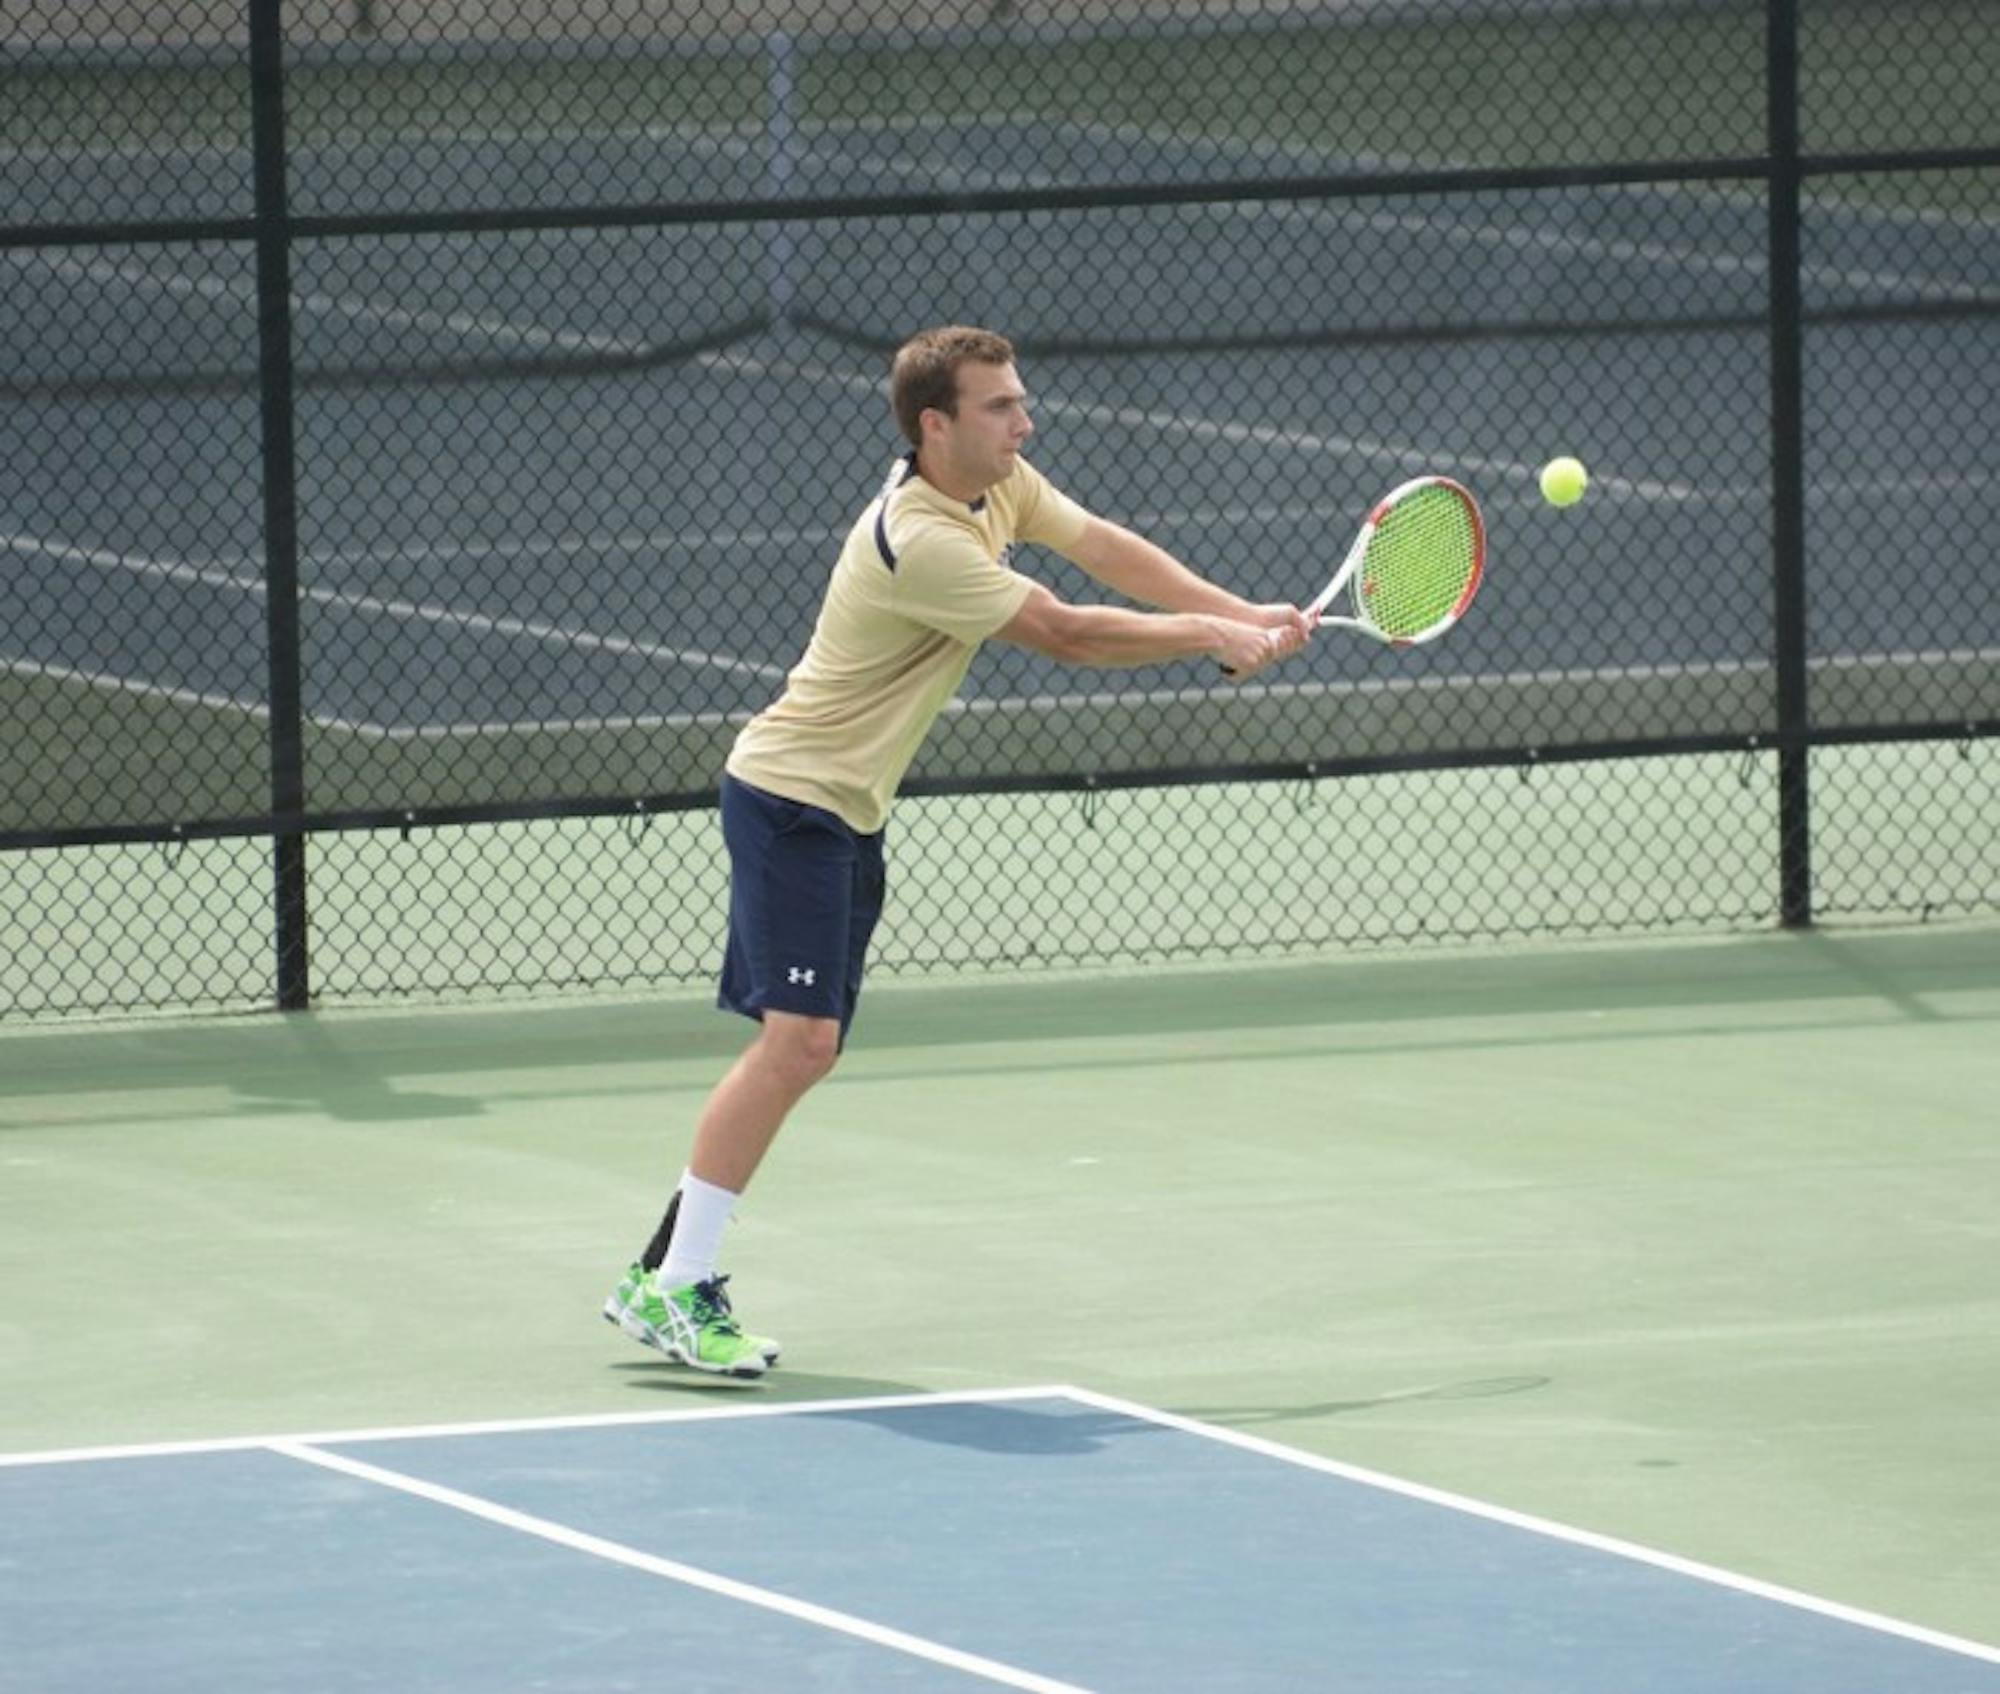 Junior Eddy Covalschi returns a shot during Notre Dame’s victory over Clemson on April 10 at Courtney Tennis Center. Covalschi lost his doubles match with junior Josh Hagar in Friday’s Irish loss.